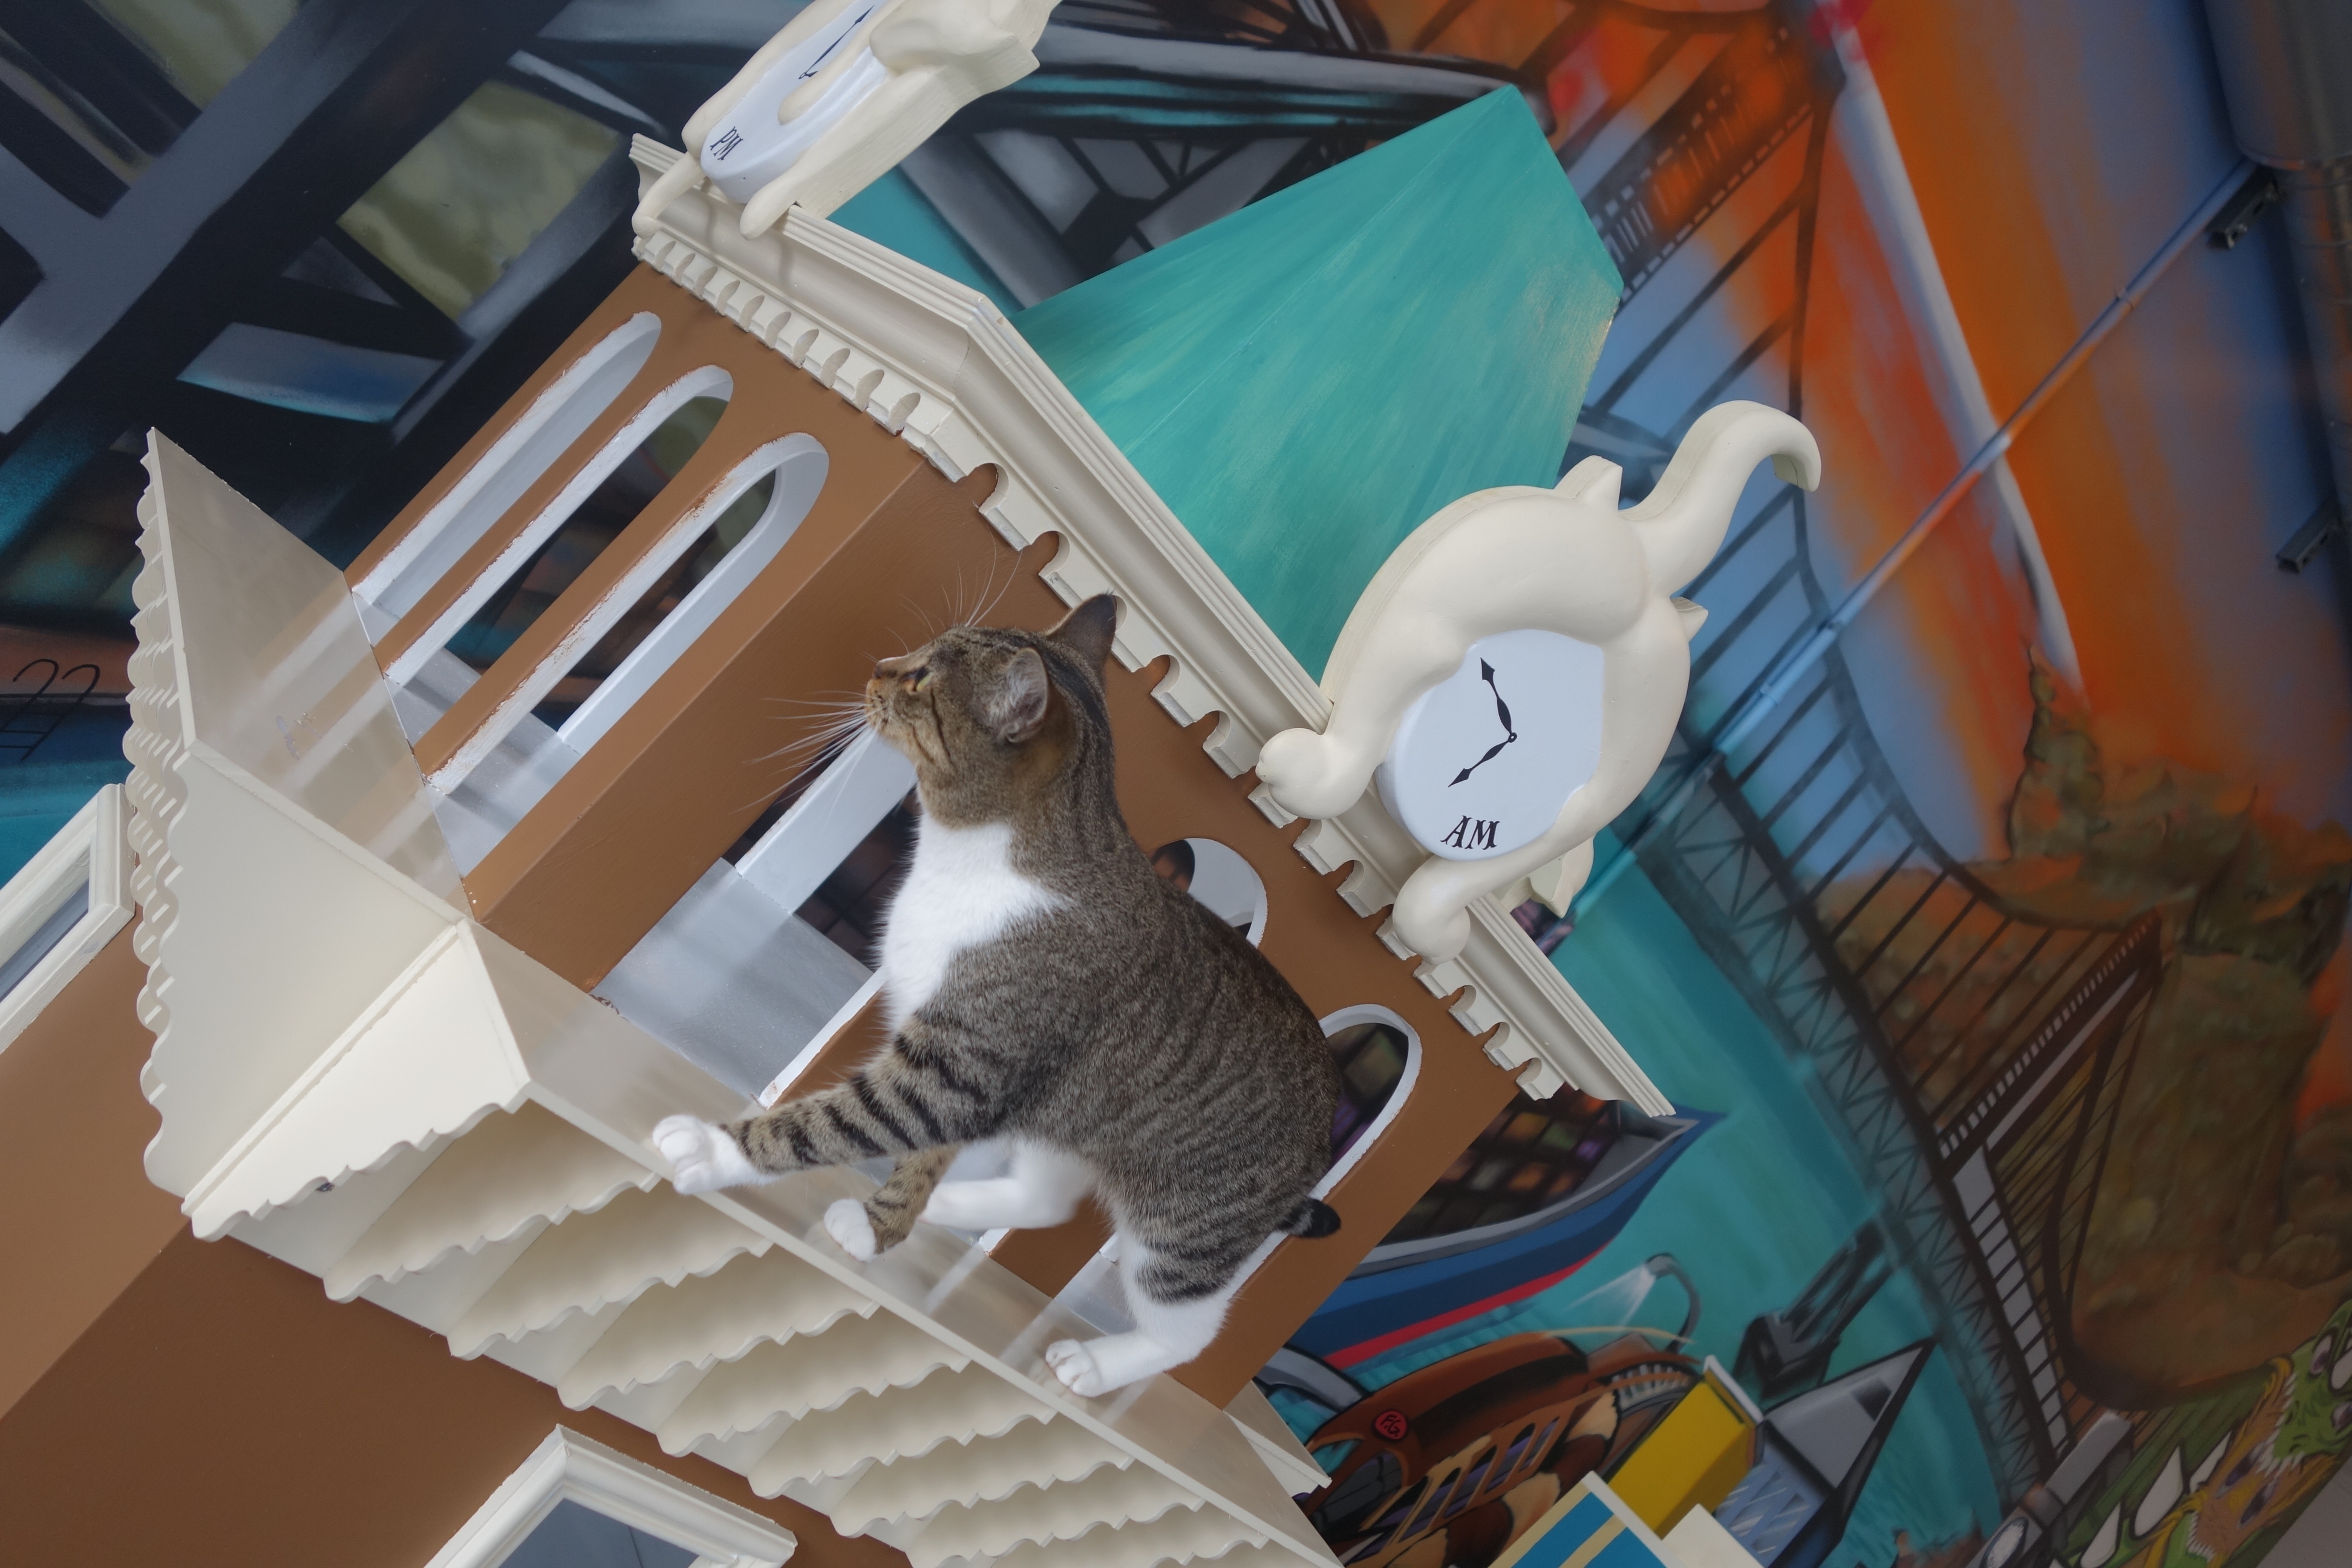 A cat walks atop a reproduction of Oakland's Tribune Tower at the Cat Town Cafe in Oakland on Oct. 25, 2014. (Katy Steinmetz for TIME)